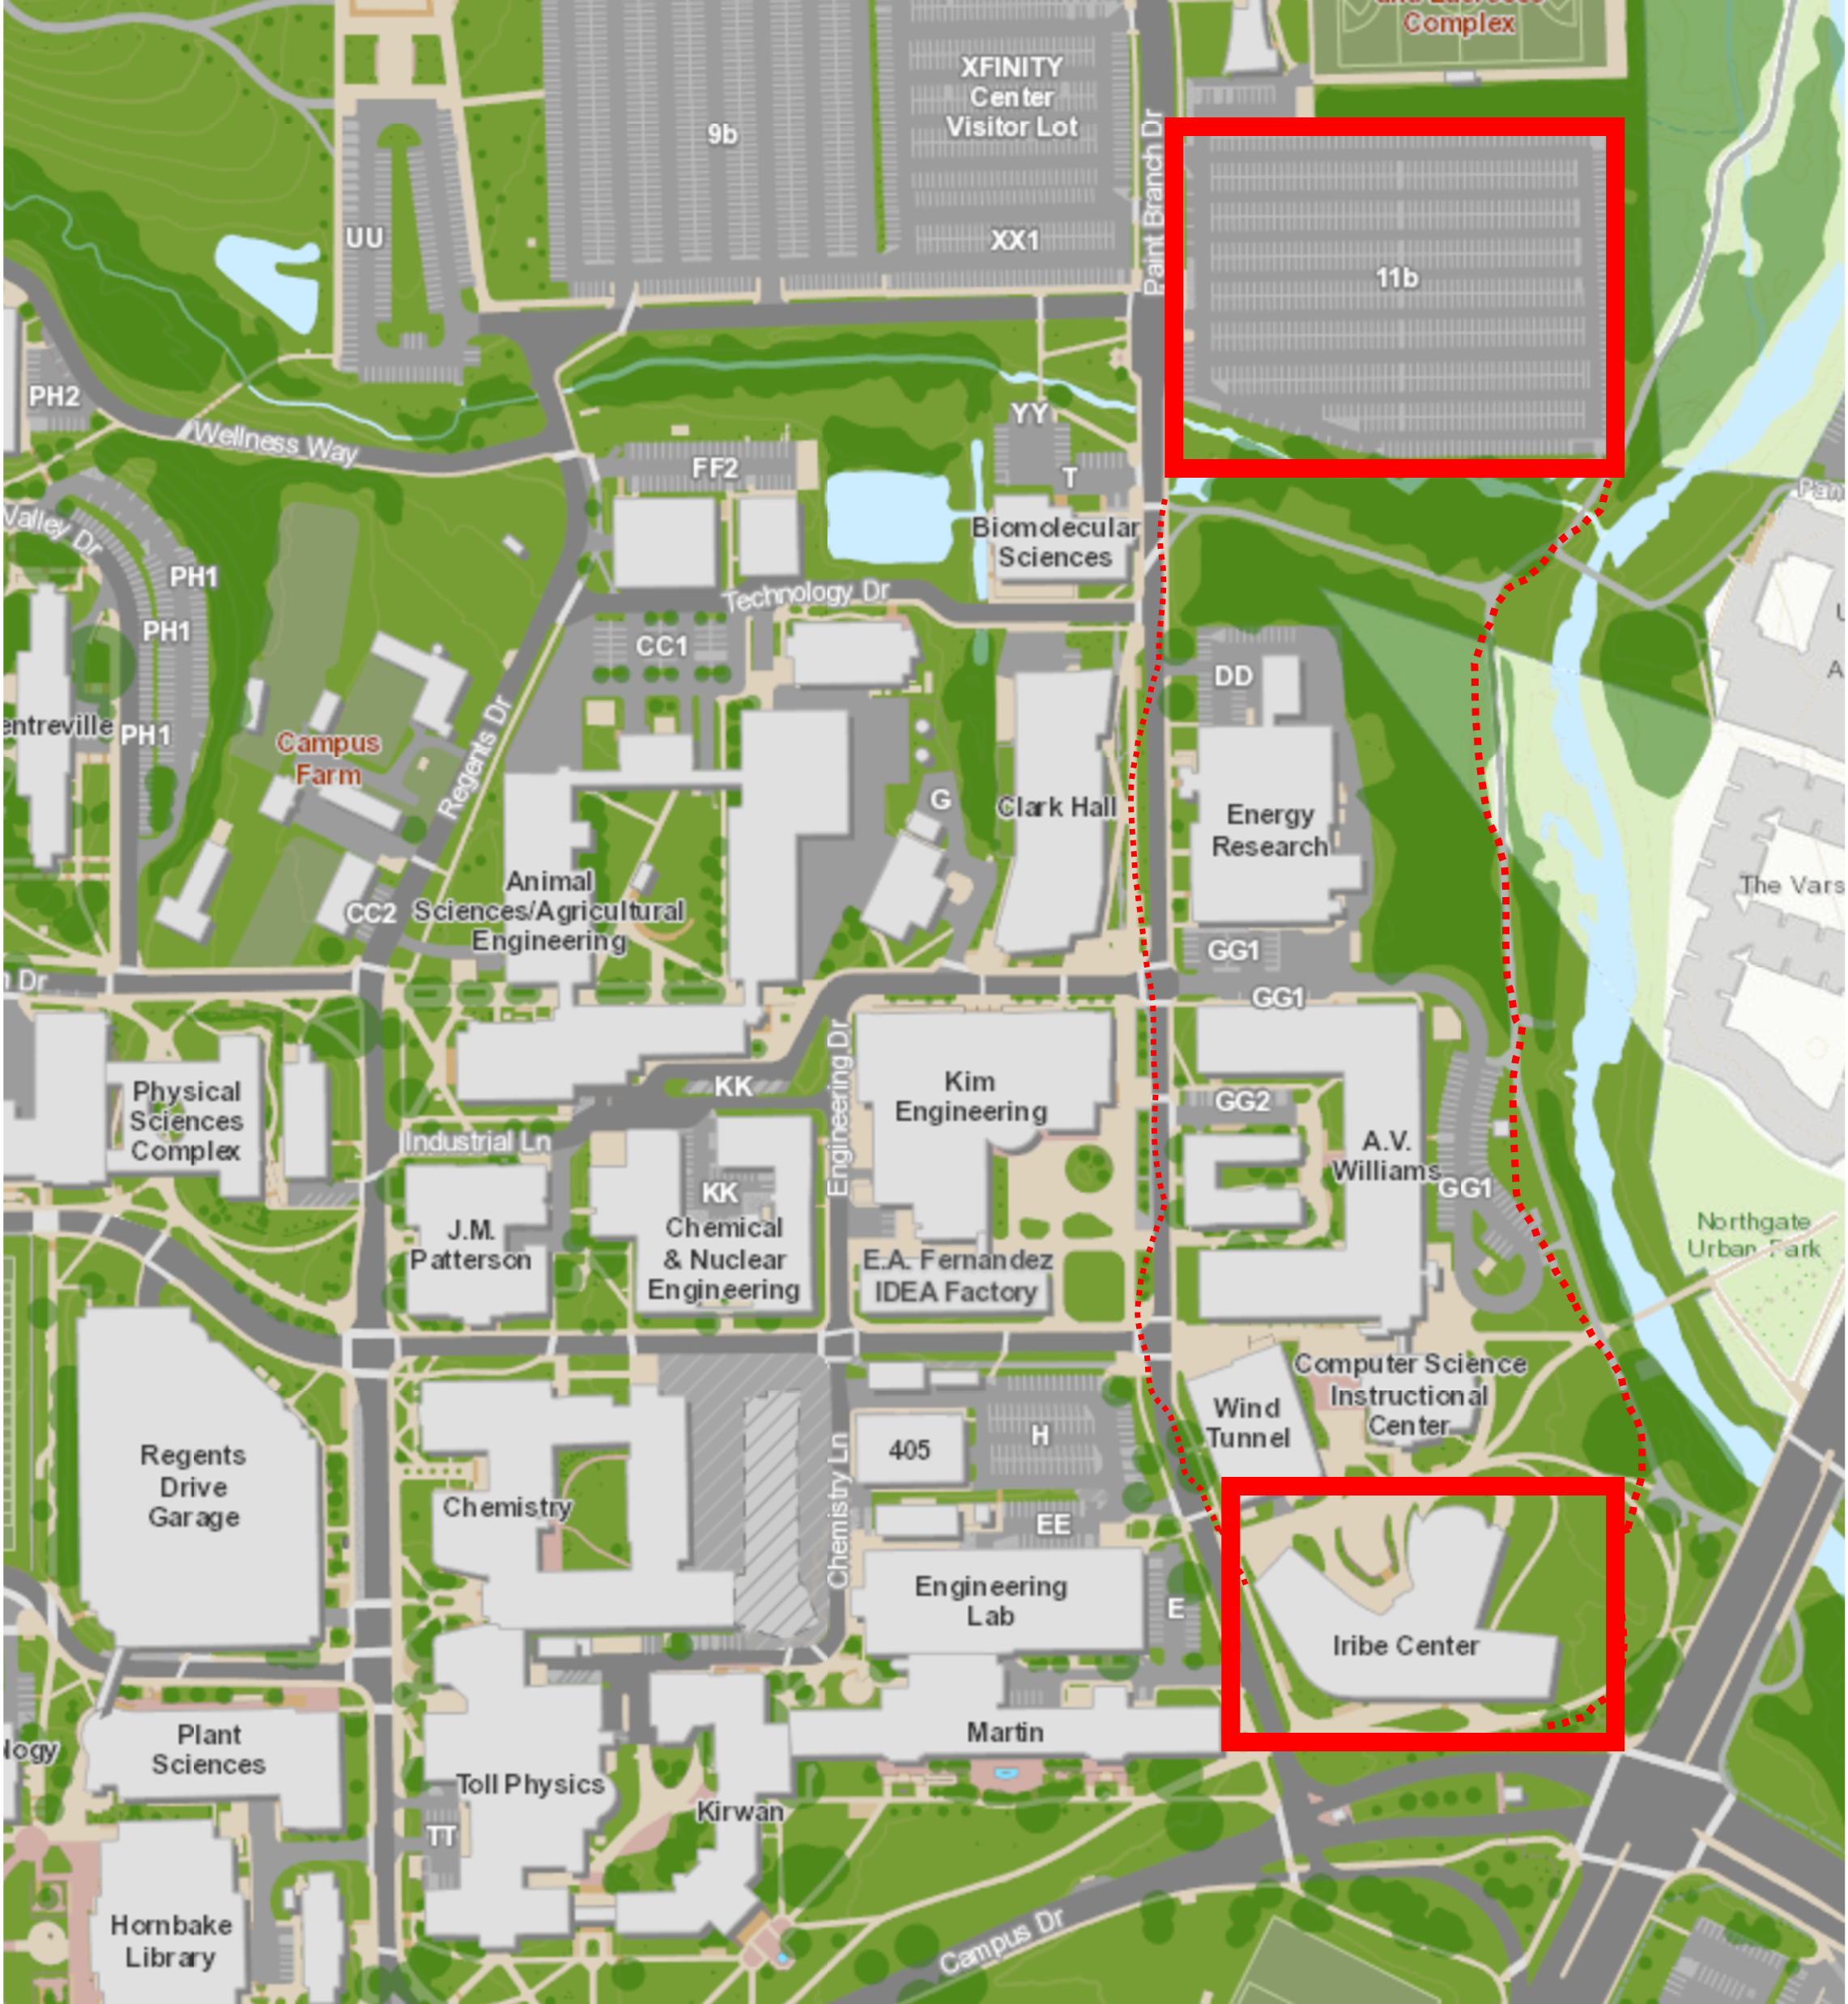 map of UMD campus showing the connection between Parking lot 11b on the north side of campus and two trails on either side connecting to the Iribe Center on the south side (Campus Drive)